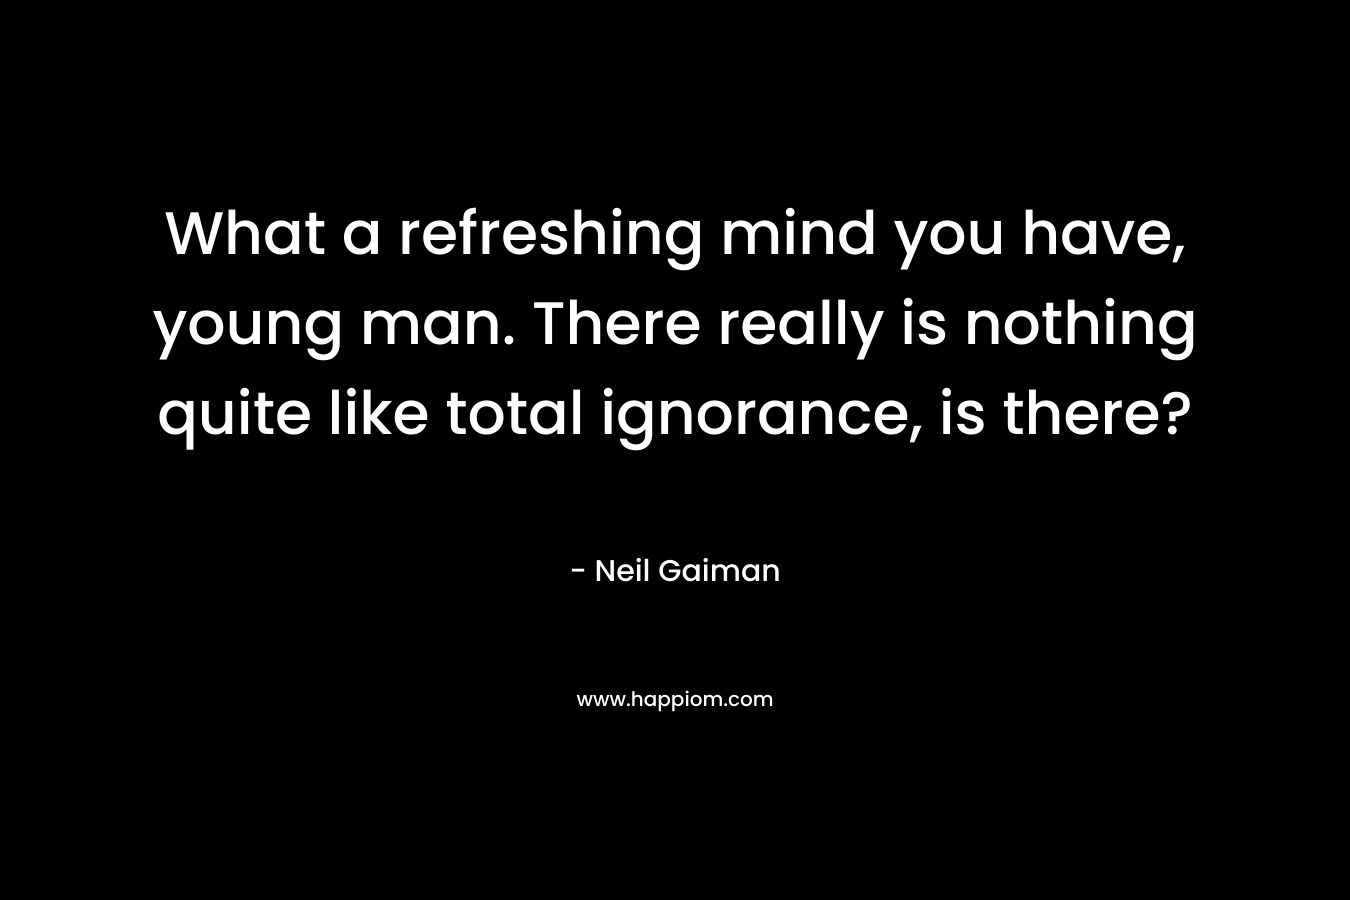 What a refreshing mind you have, young man. There really is nothing quite like total ignorance, is there? – Neil Gaiman